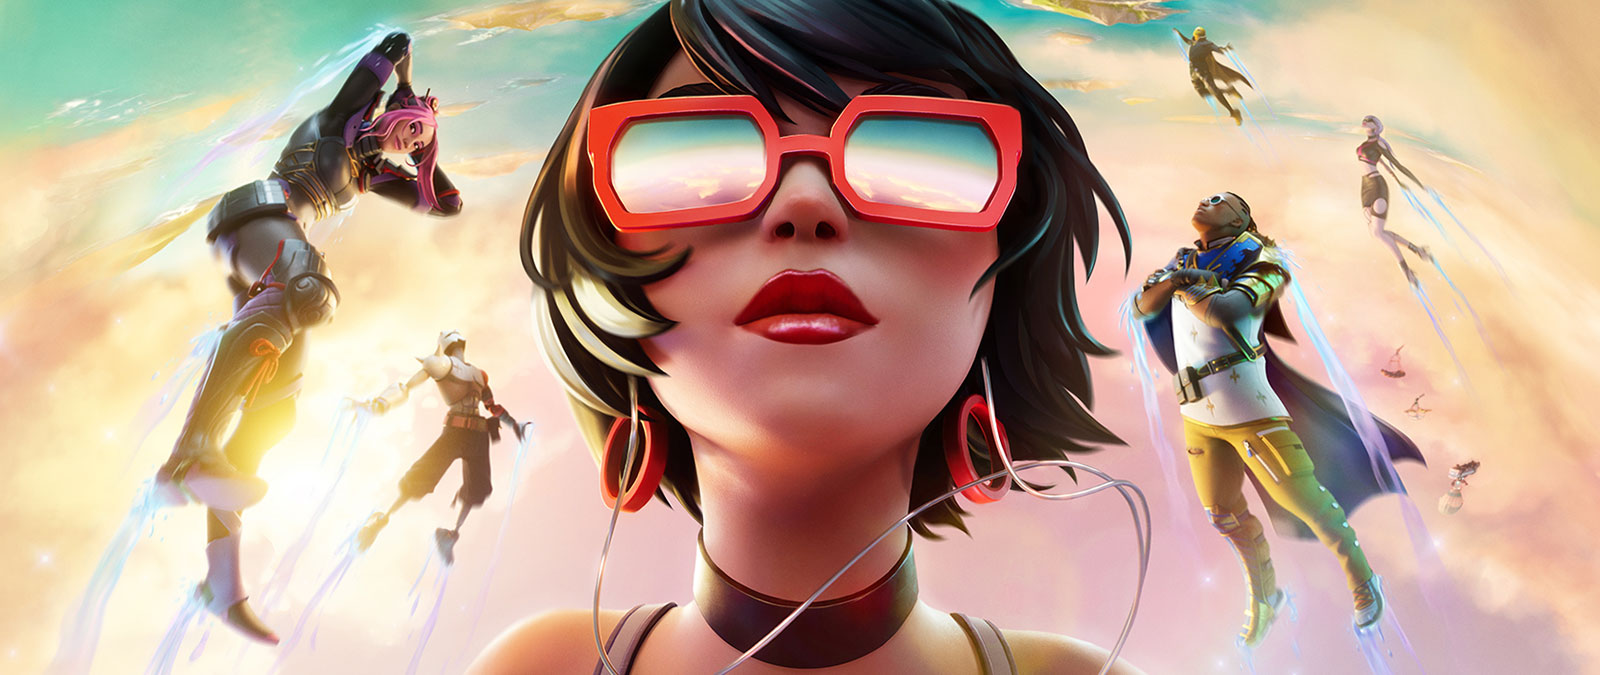 A girl in red sunglasses floats in the clouds with other characters against a pastel-colored sky.